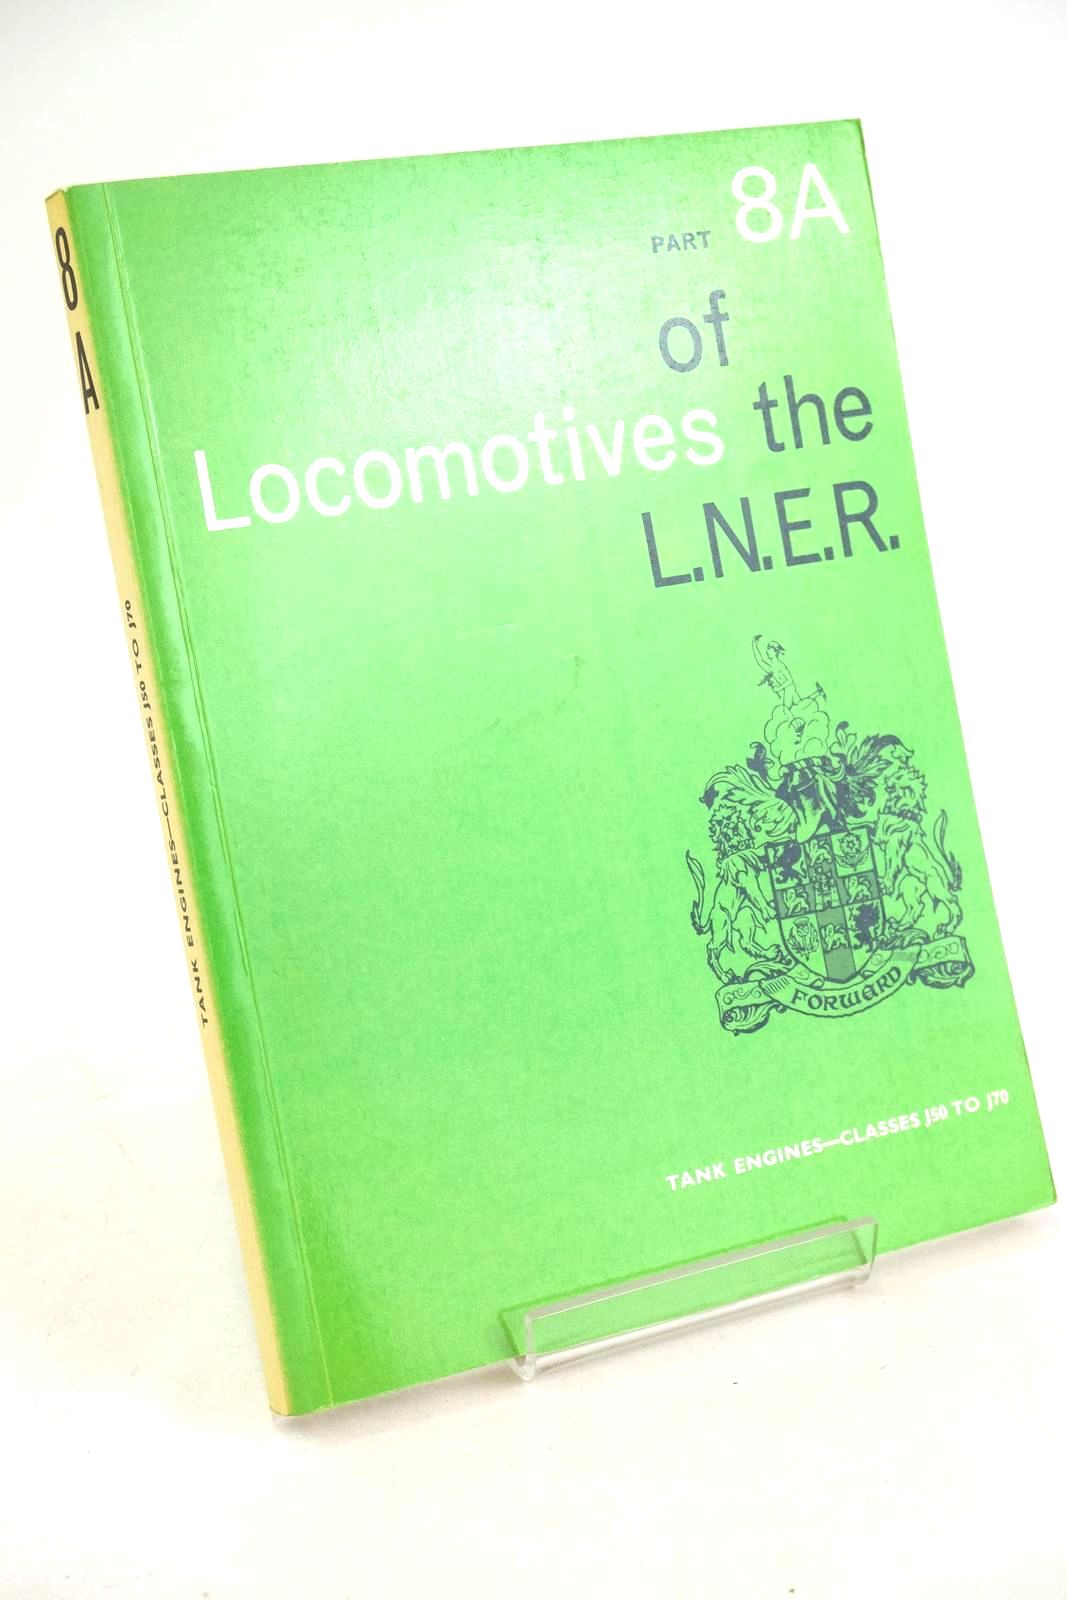 Photo of LOCOMOTIVES OF THE L.N.E.R. PART 8A published by The Railway Correspondence And Travel Society (STOCK CODE: 1327355)  for sale by Stella & Rose's Books